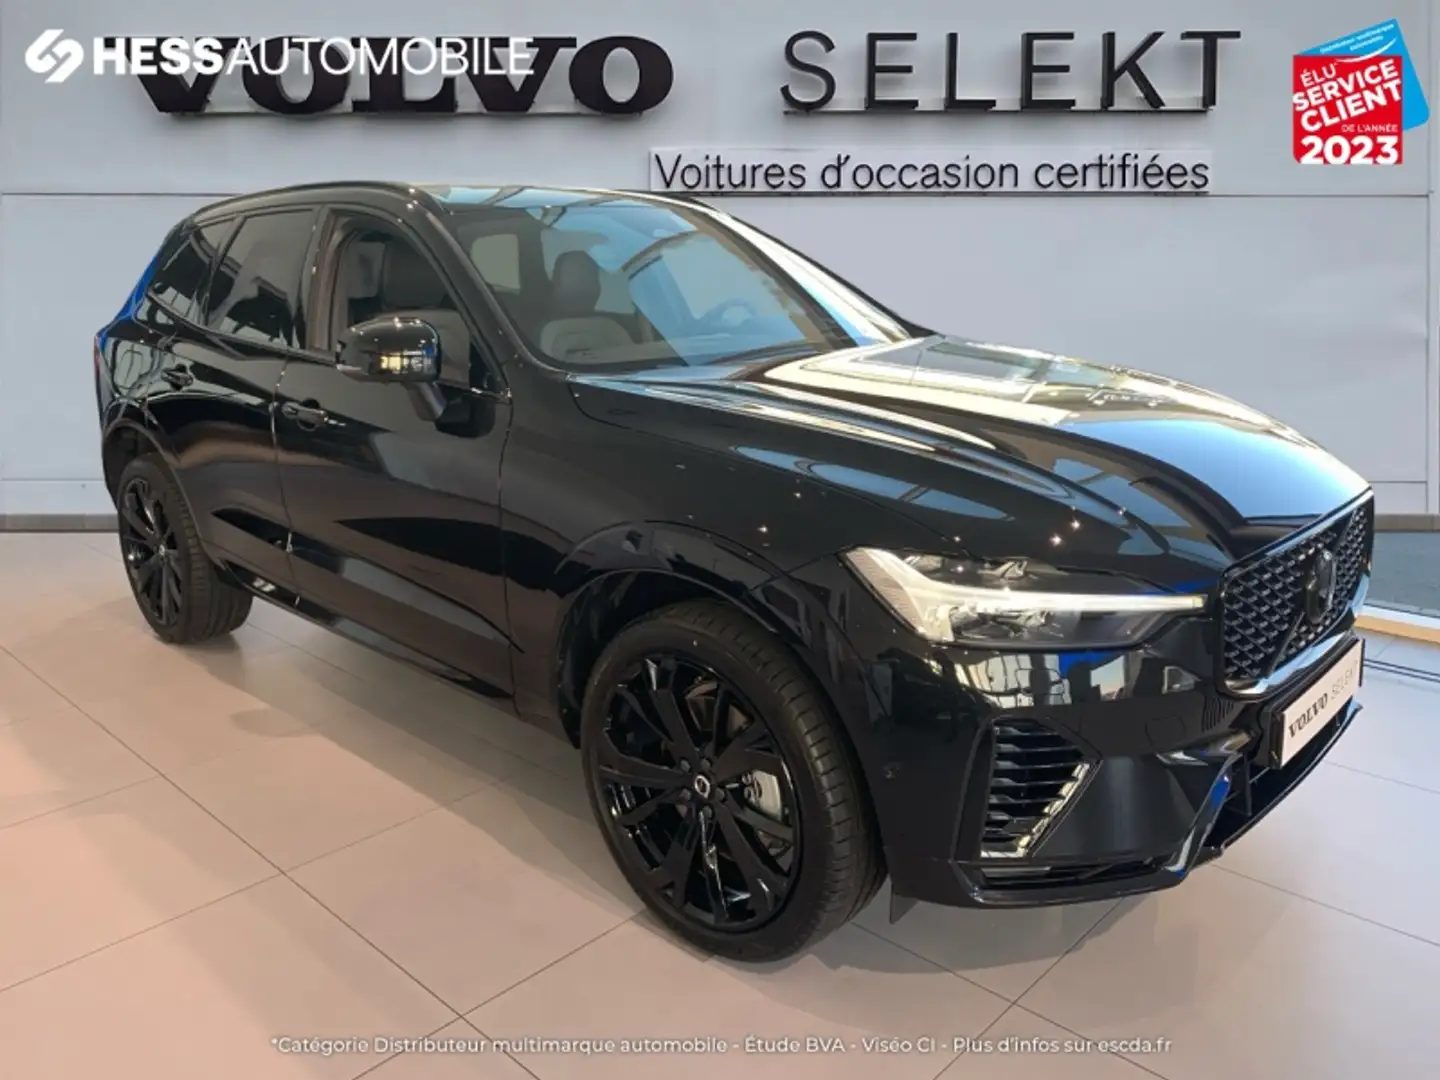 Volvo XC60 T6 AWD 253 + 145ch  Black Edition Geartronic - 1